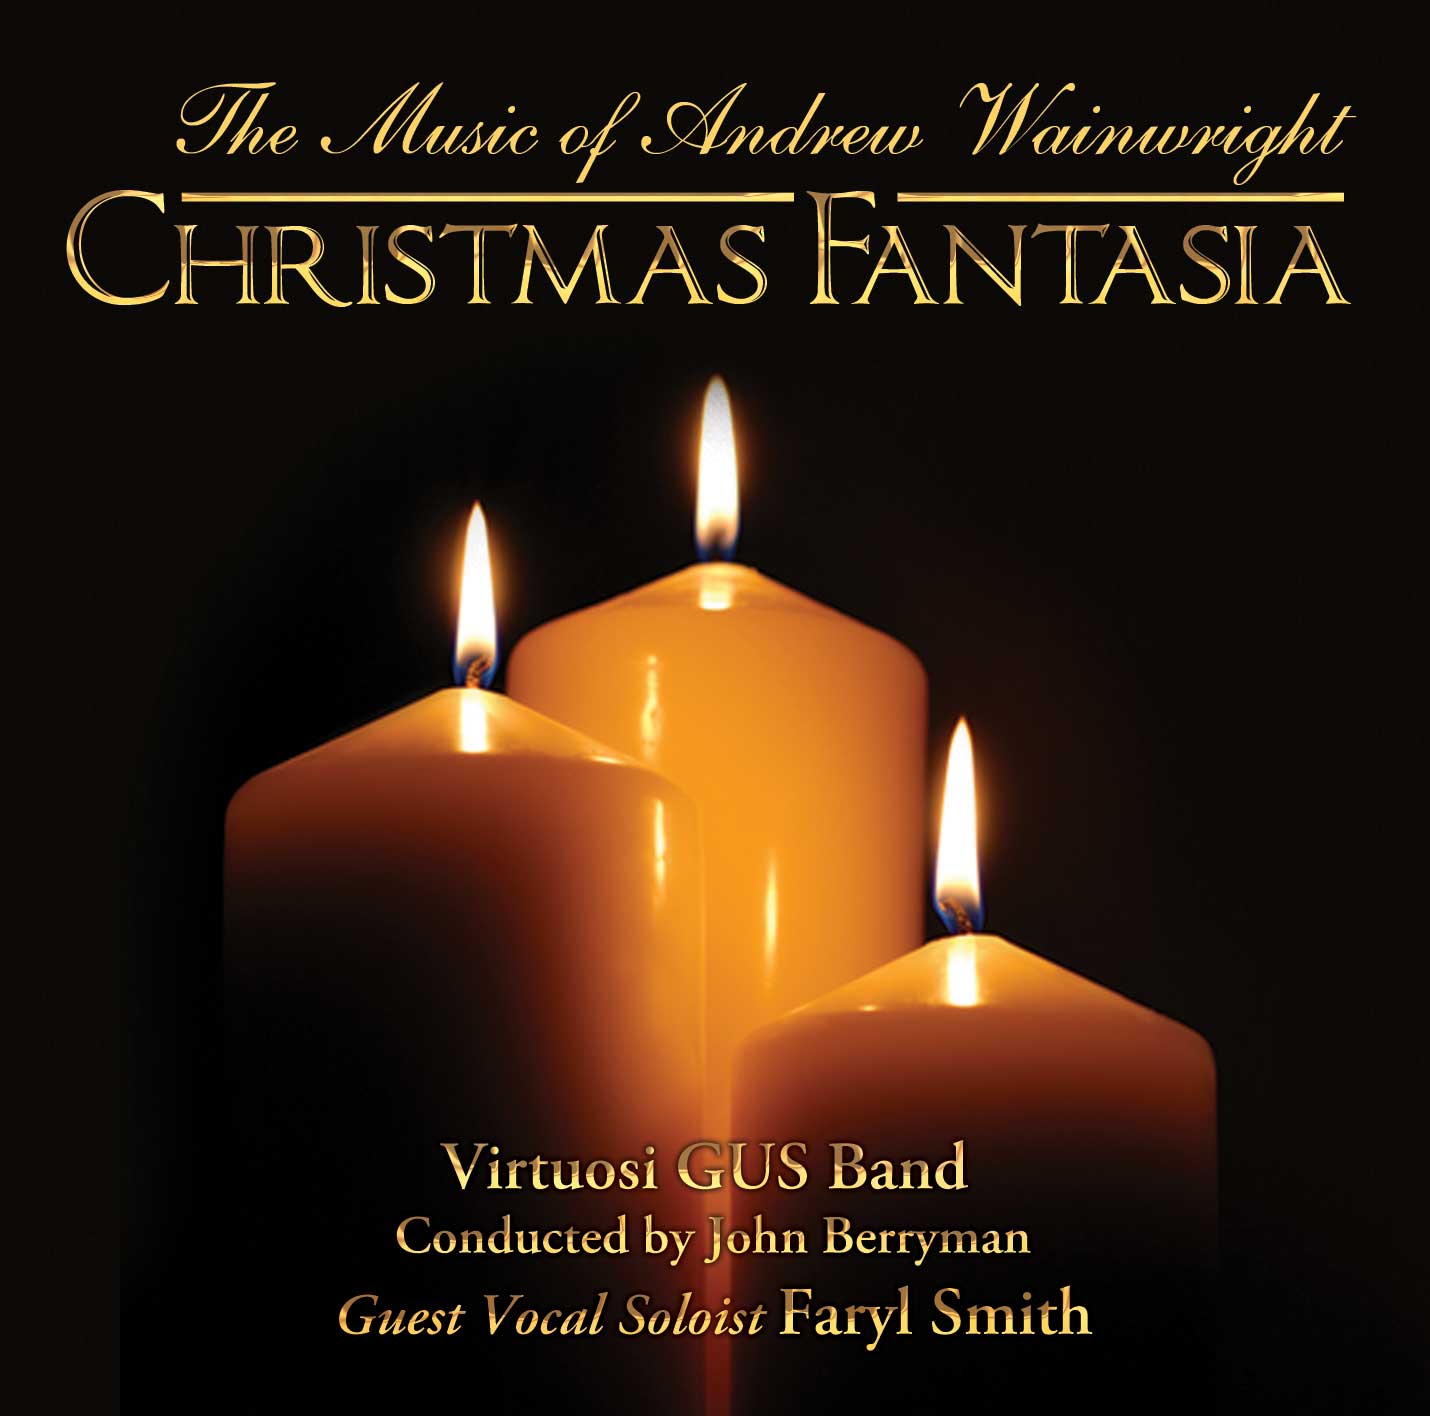 Christmas Fantasia - The Music of Andrew Wainwright - Download